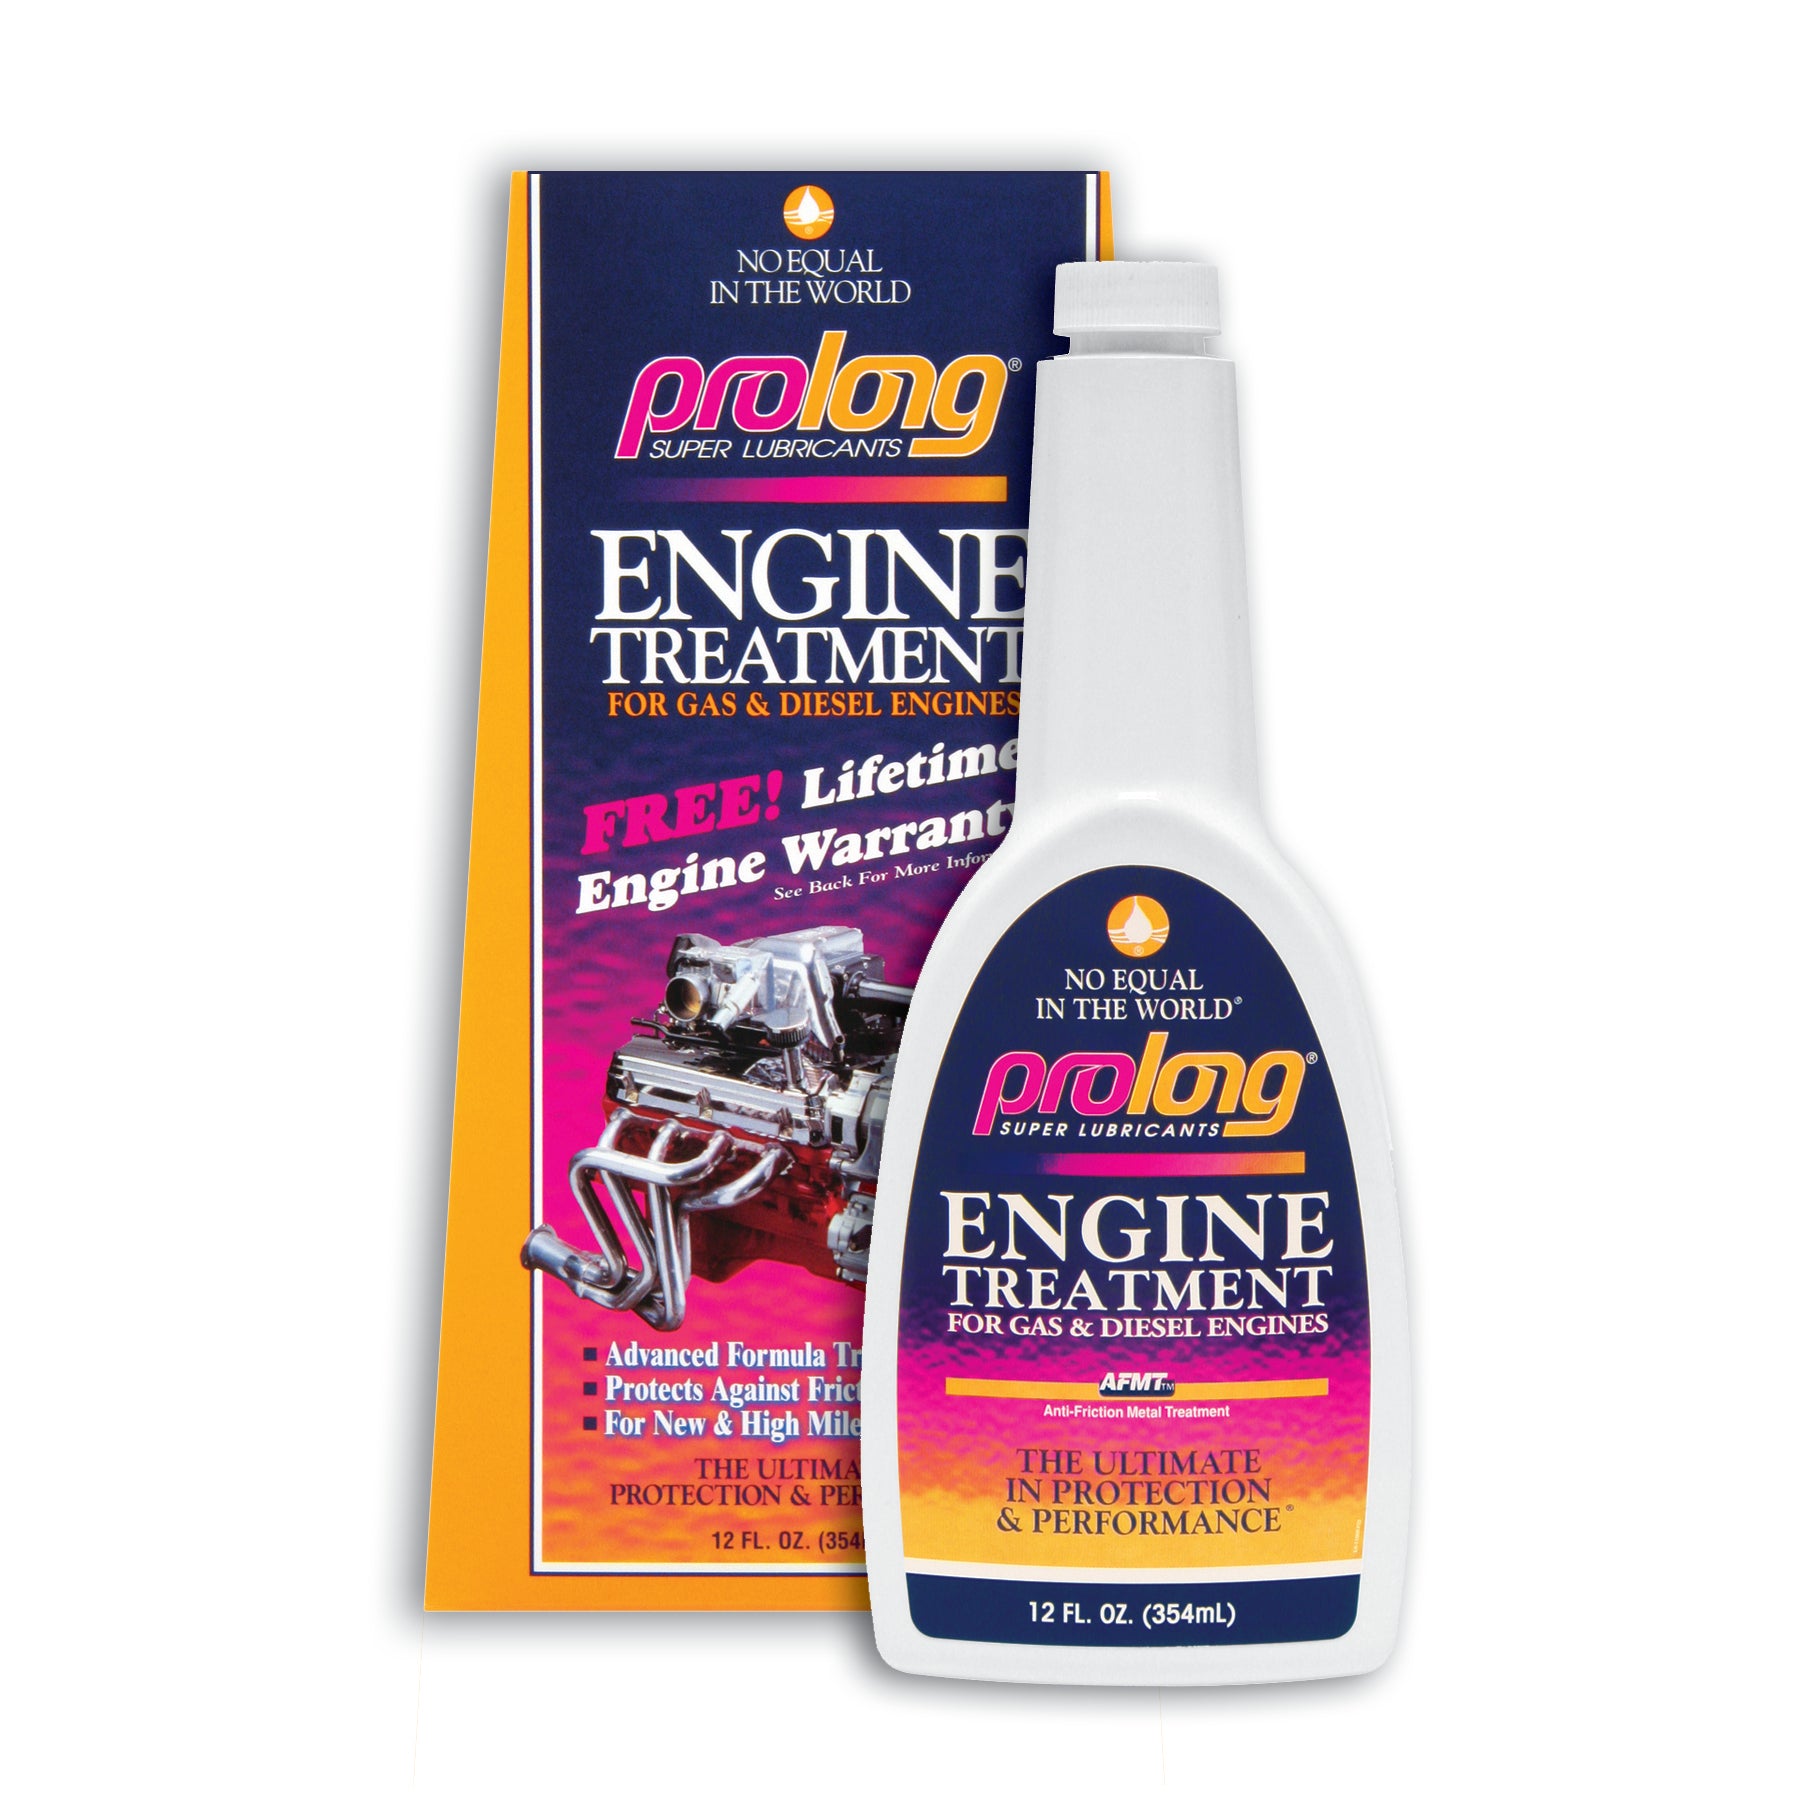 Products - Botogen  Motor Oils, Additives, Car Care & Hygiene Products